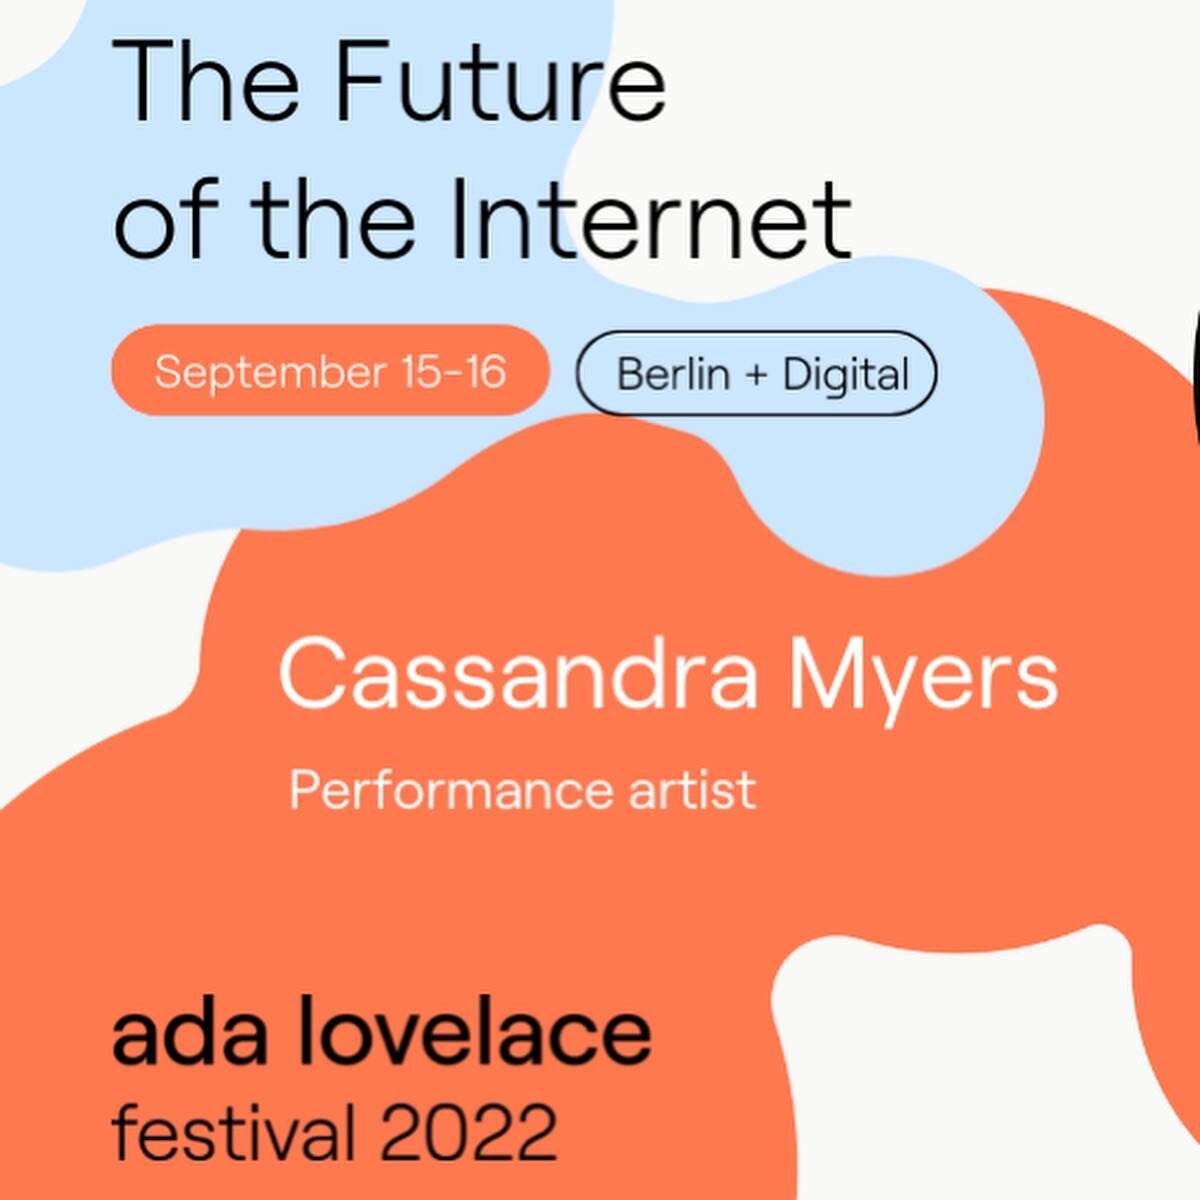 Back this year @join_ada in Berlin to perform a site specific poem on this years concept The Future of the Internet! Stay tuned to my story for travel updates and footage!